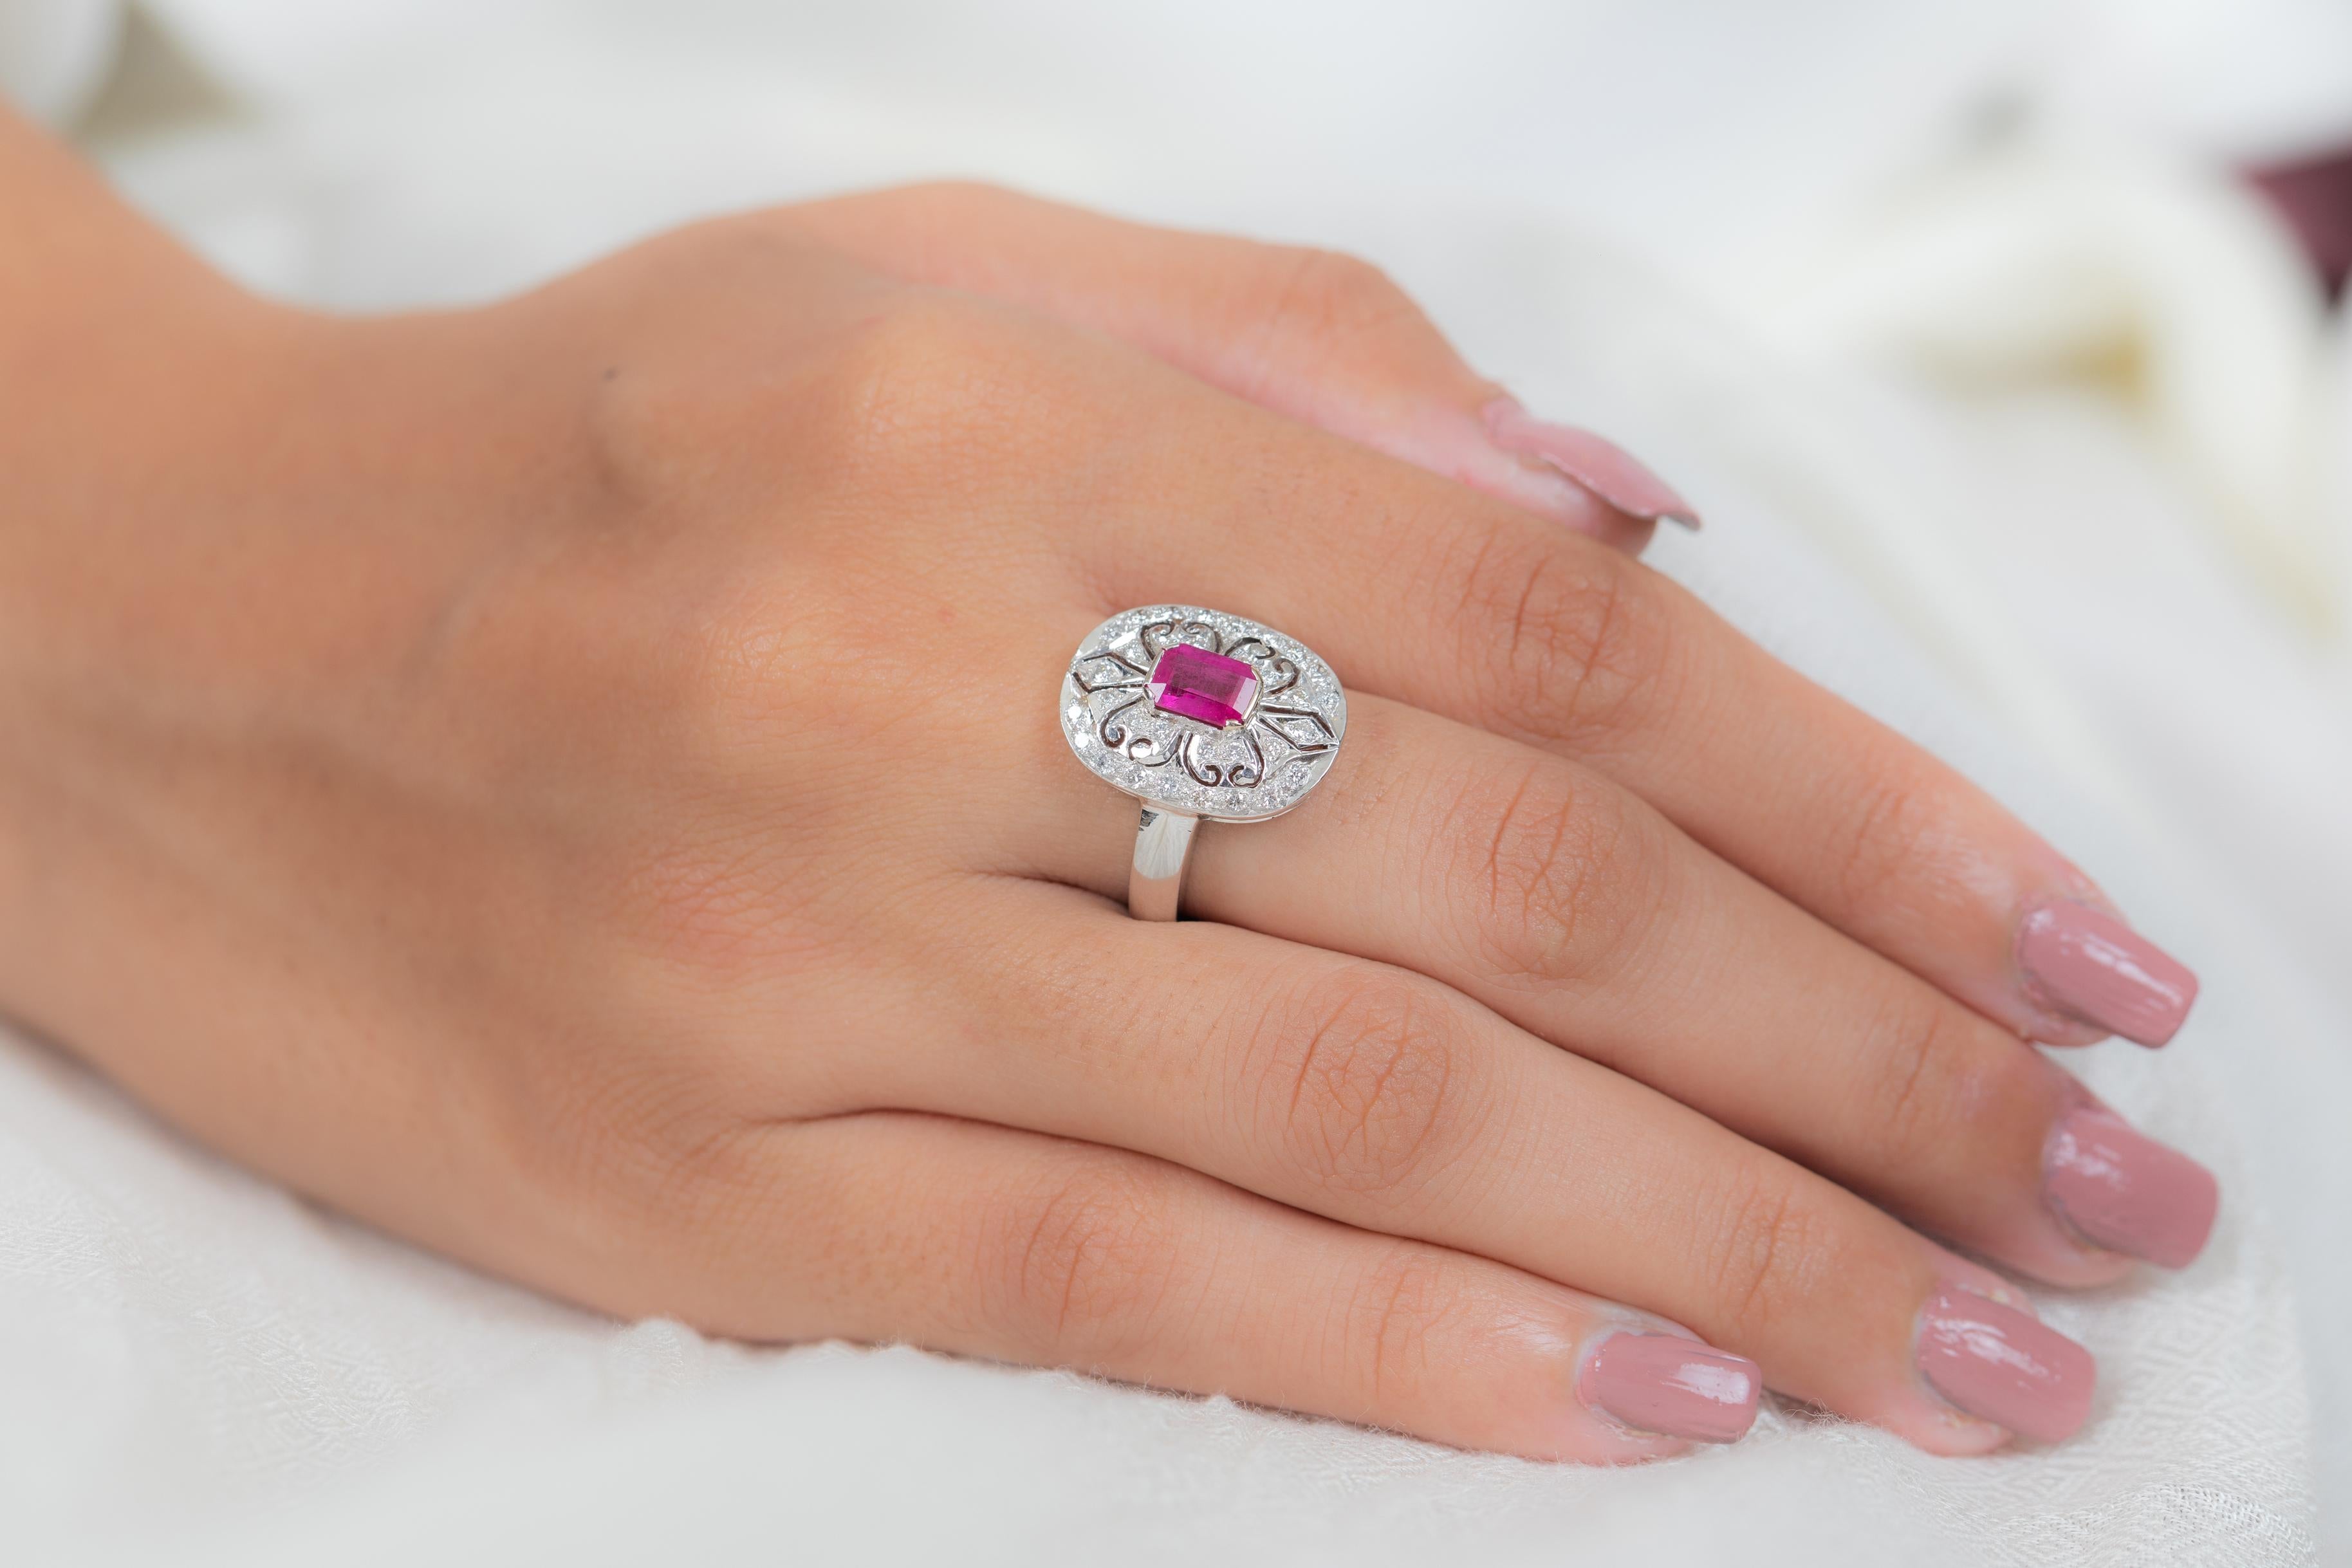 For Sale:  Clustered Diamond Cocktail Ring with 2.31 Carat Ruby in 18K White Gold Engraving 8